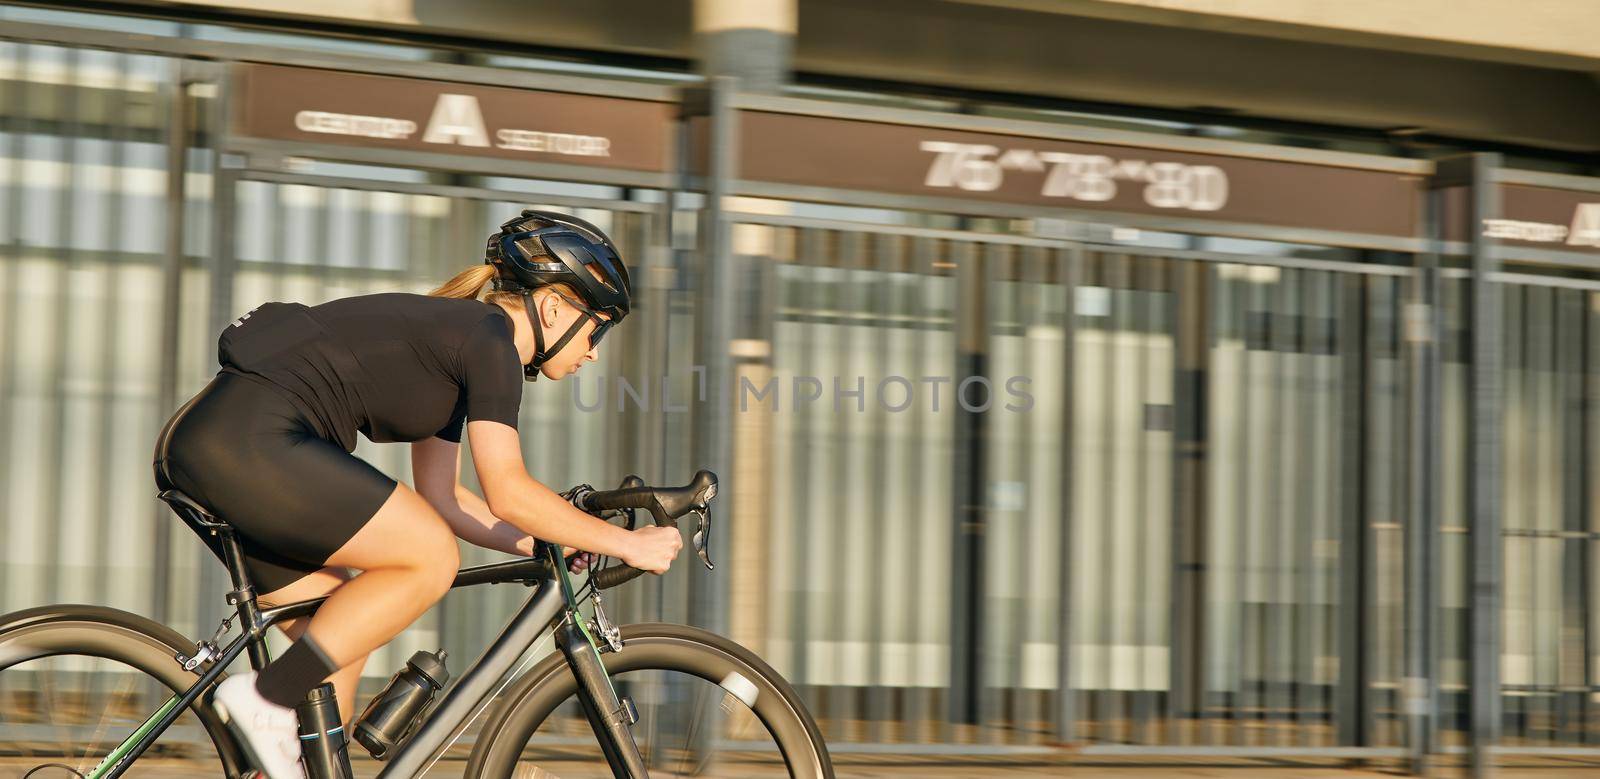 Professional female cyclist in black cycling garment and protective gear riding bicycle in city center rushing and passing buildings by friendsstock